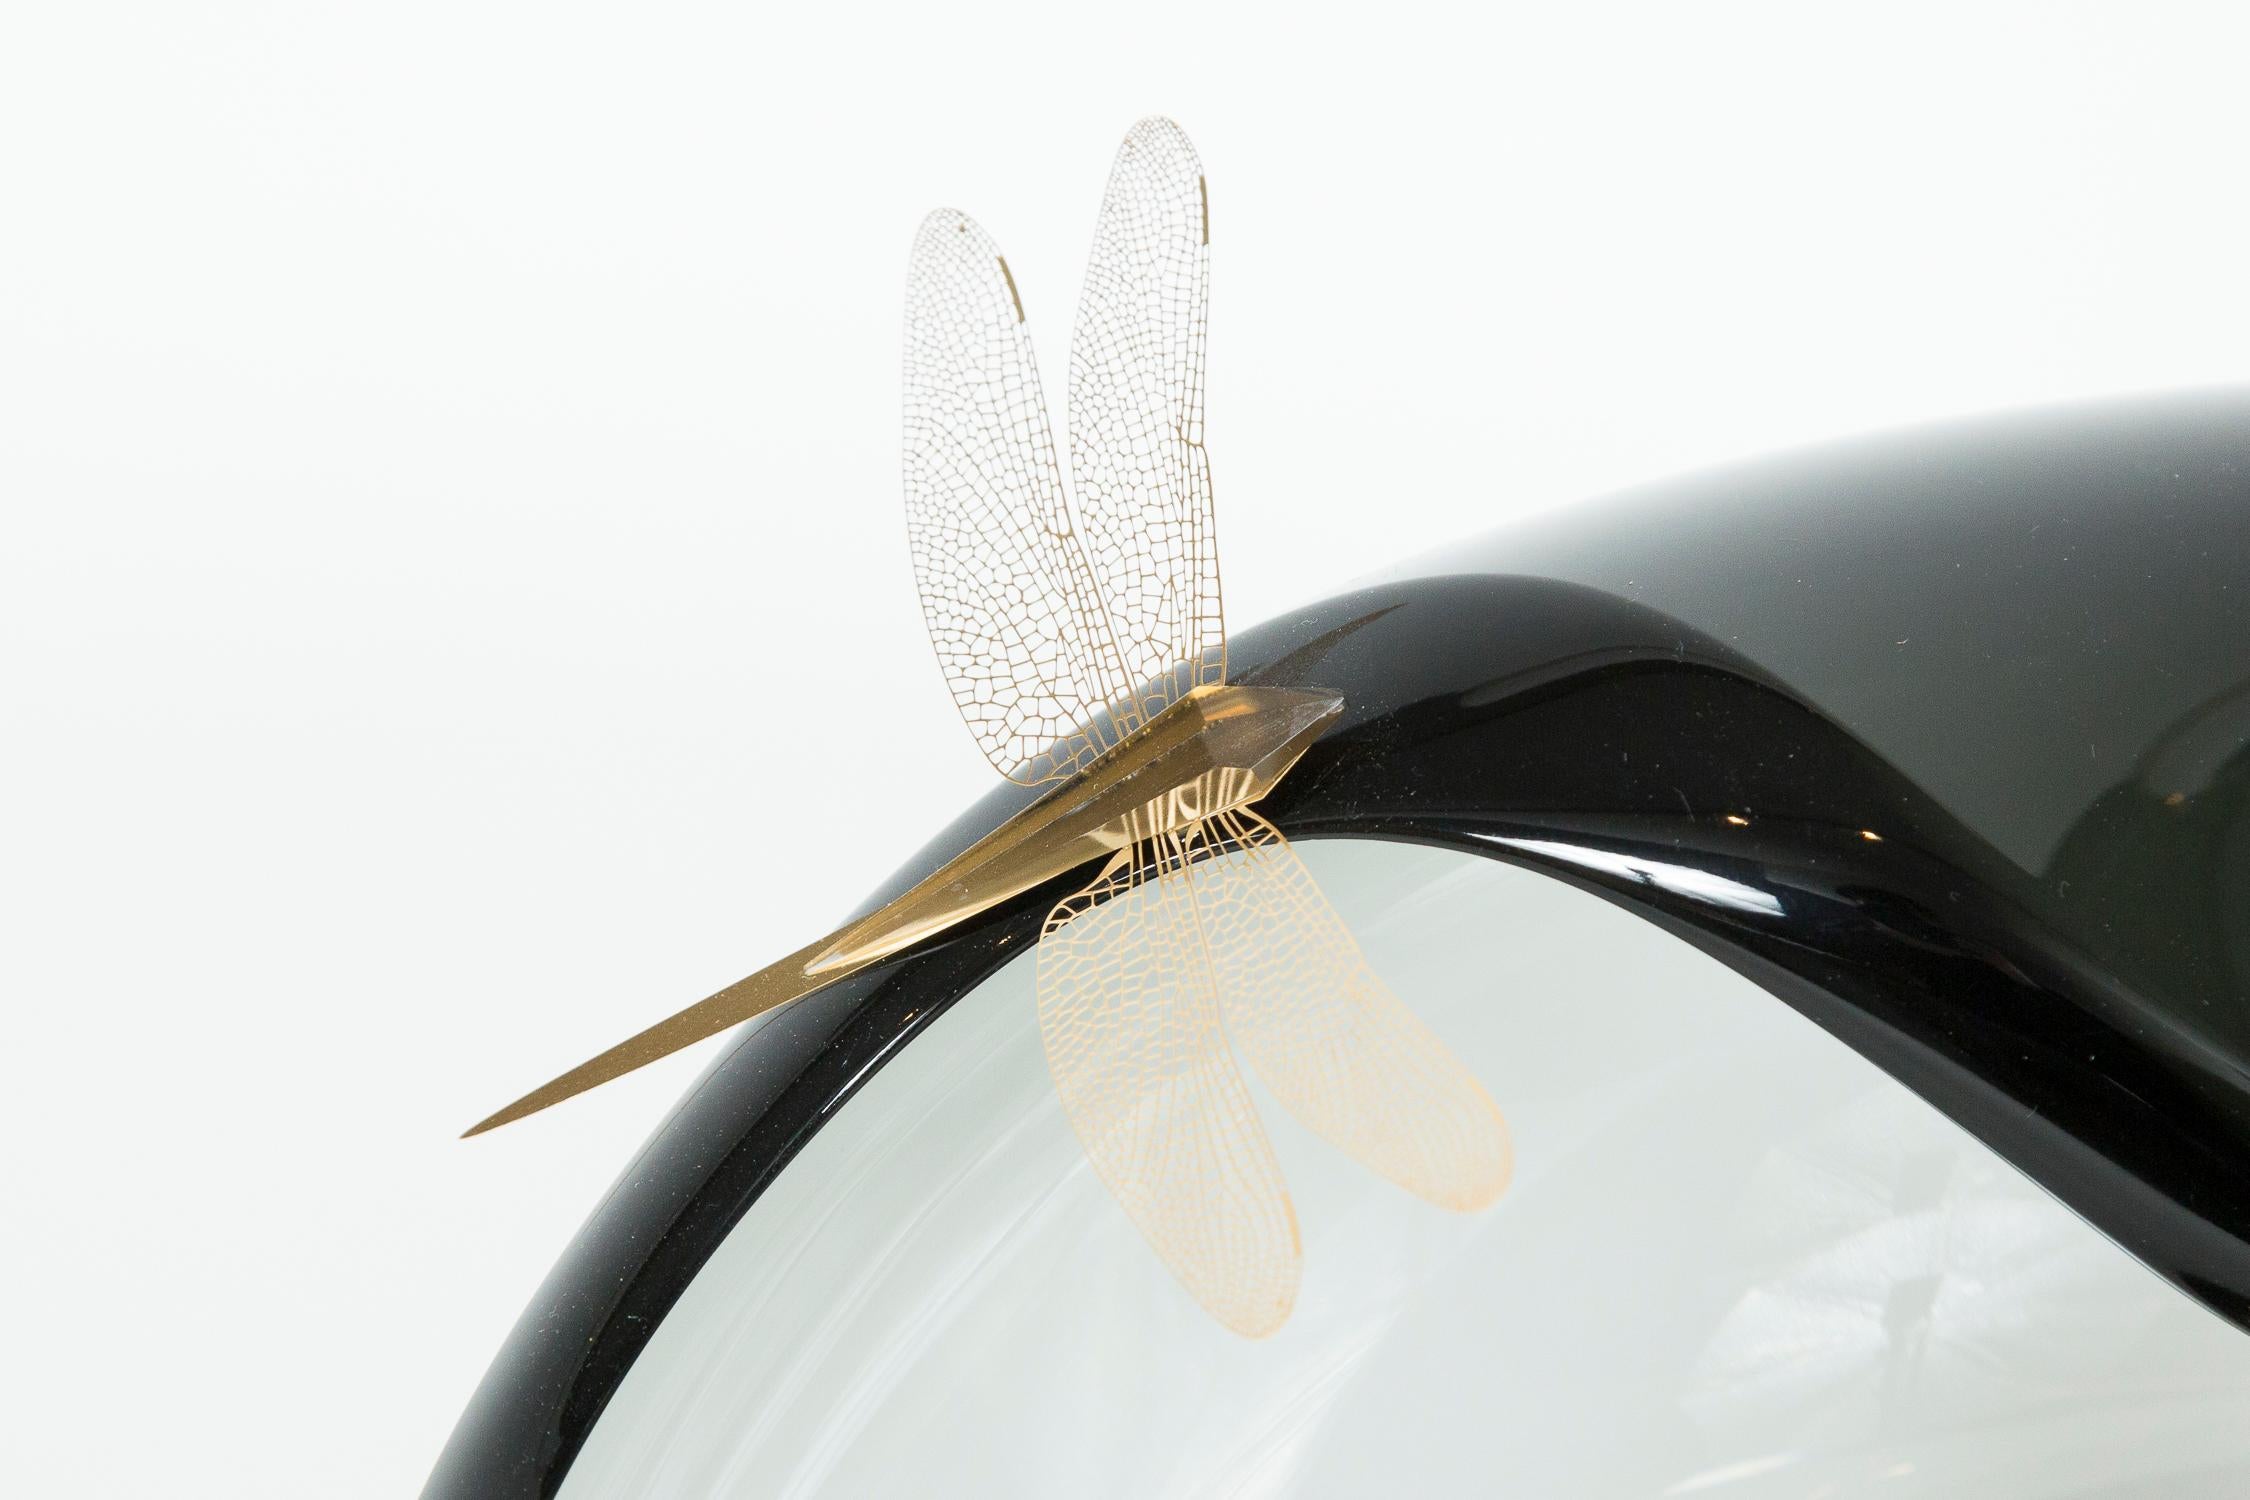 Each dragonfly is made from laser cut sheet steel which has been gold plated and adorned with a cut glass abdomen. The steel is thin enough to allow the wings to flutter. 

With infinite fascination for her chosen medium glass, Enemark's work